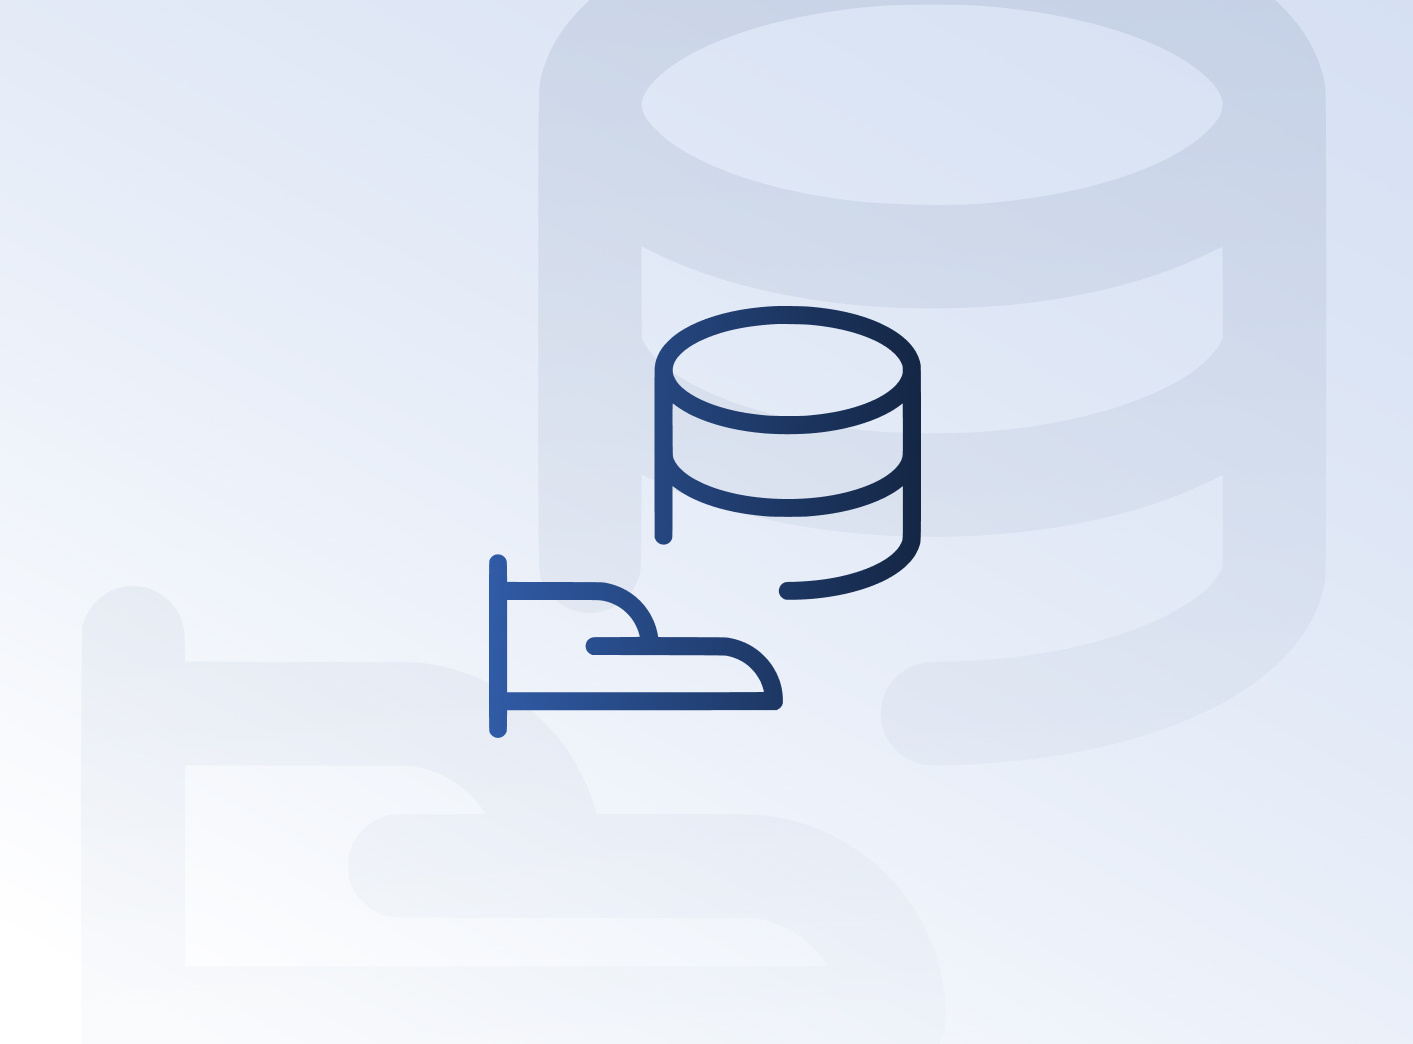 Database management, monitoring, and DBA support